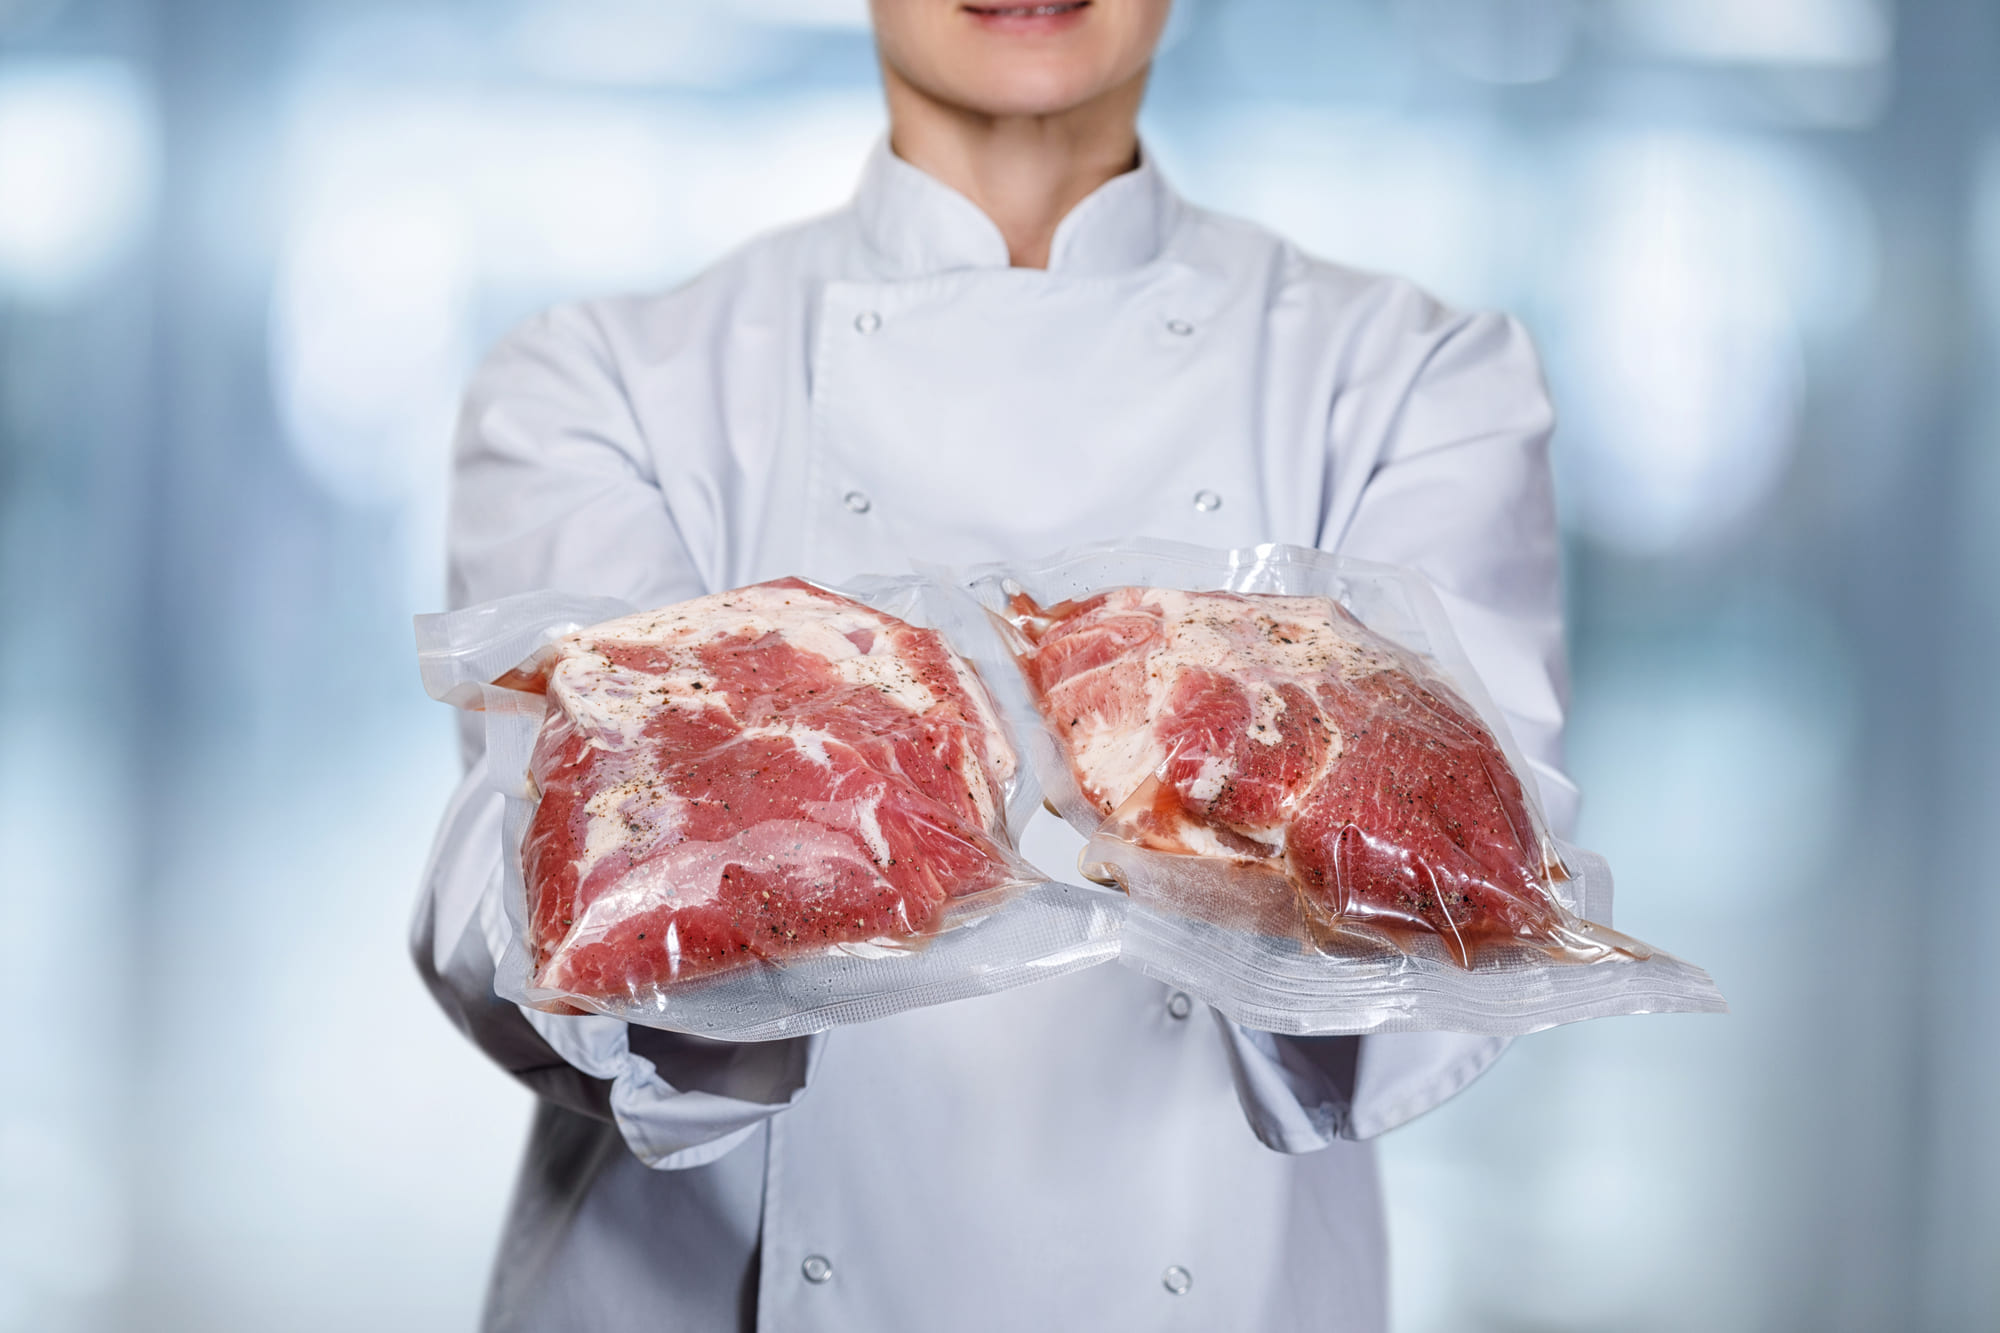 a chef holding up 2 wrapped up pieces of meat intended for a sous vide cooker